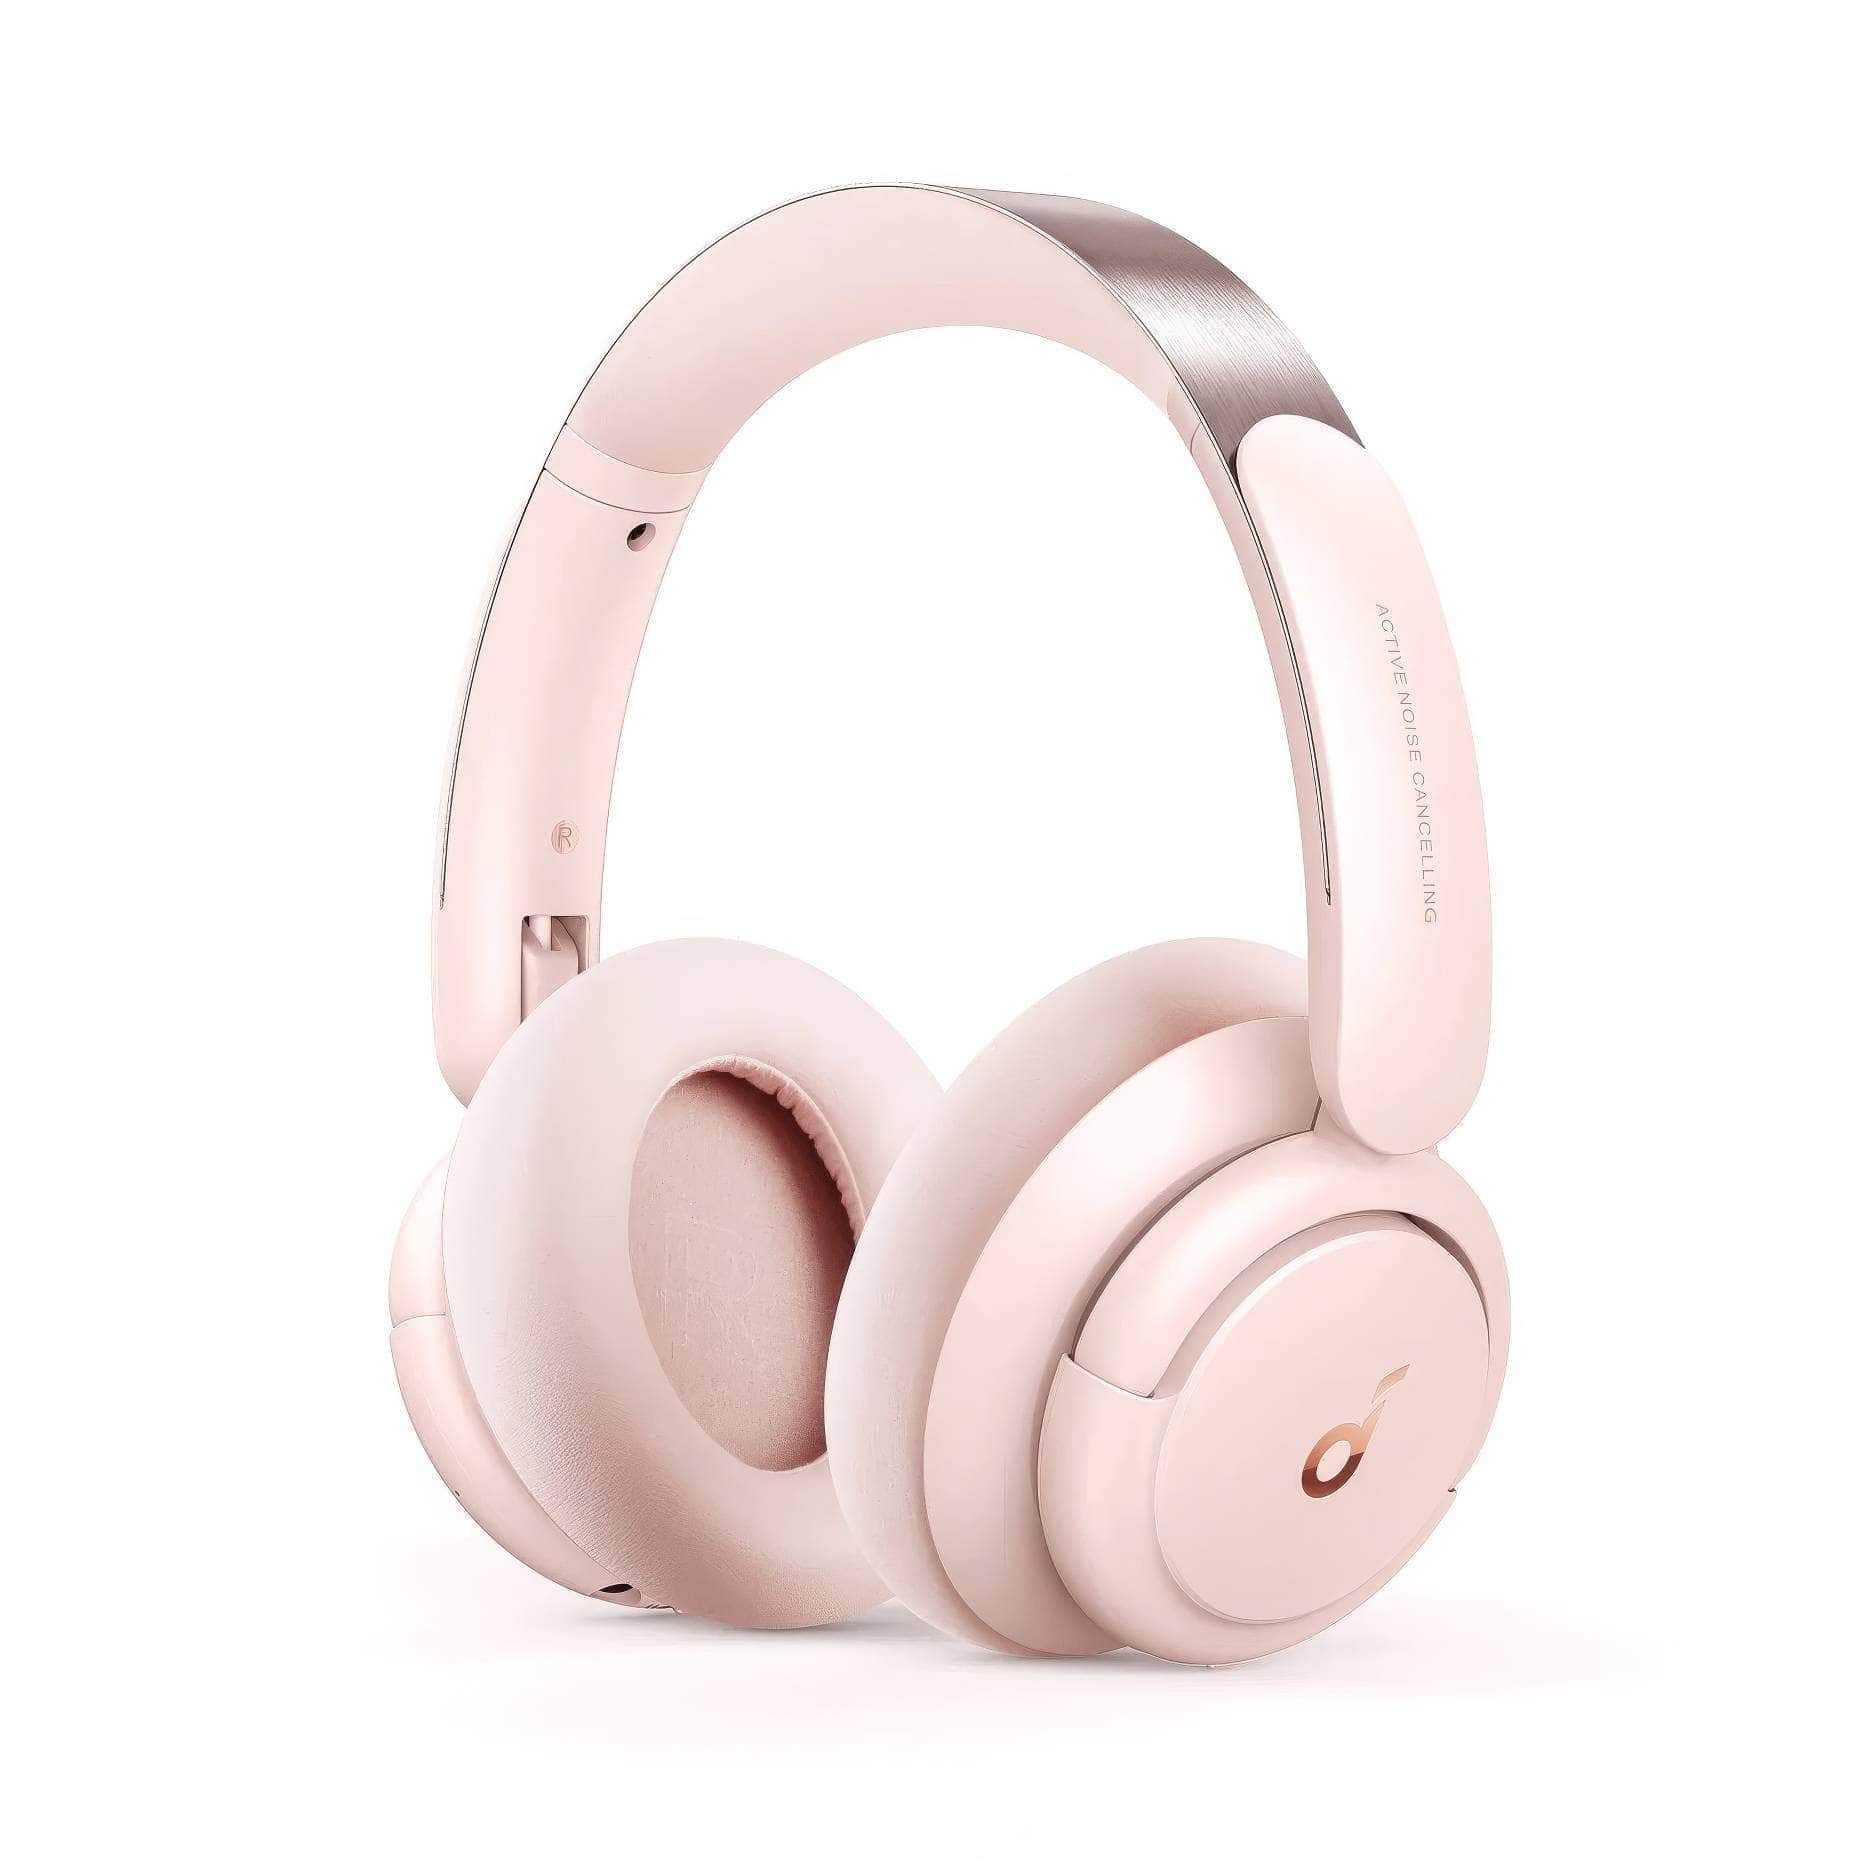 Anker Soundcore Life Q30 Hybrid Active Noise Cancelling Wireless Bluetooth Headphones - Multiple Modes, Hi-Res Sound, 40-Hour Battery Life Pink